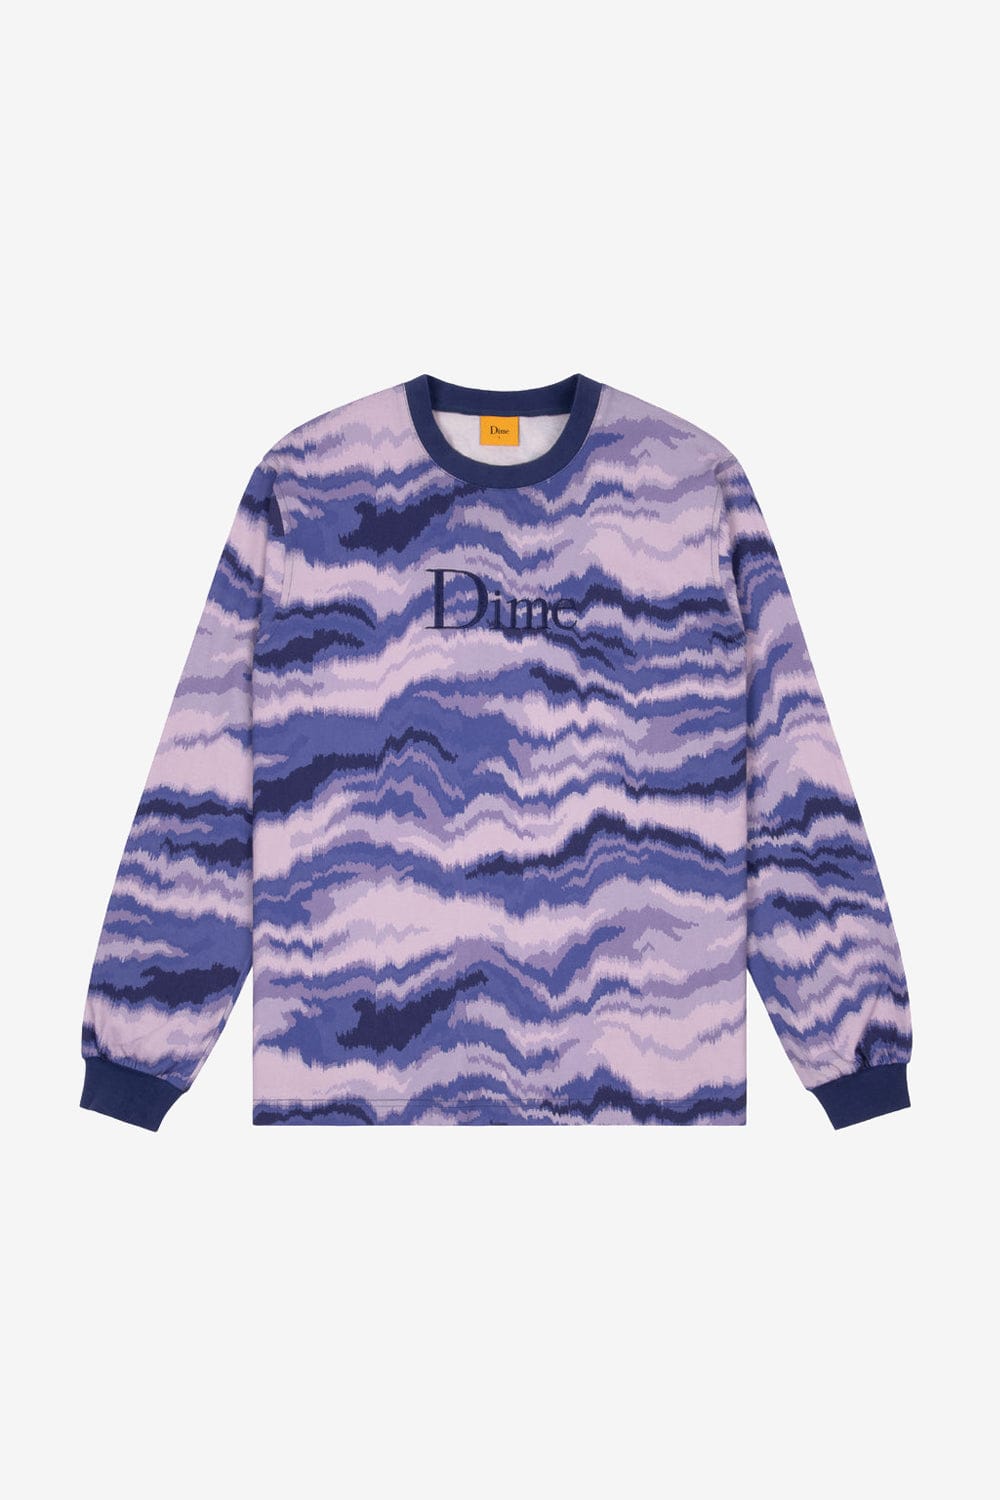 Dime Frequency LS Shirt (Purple)